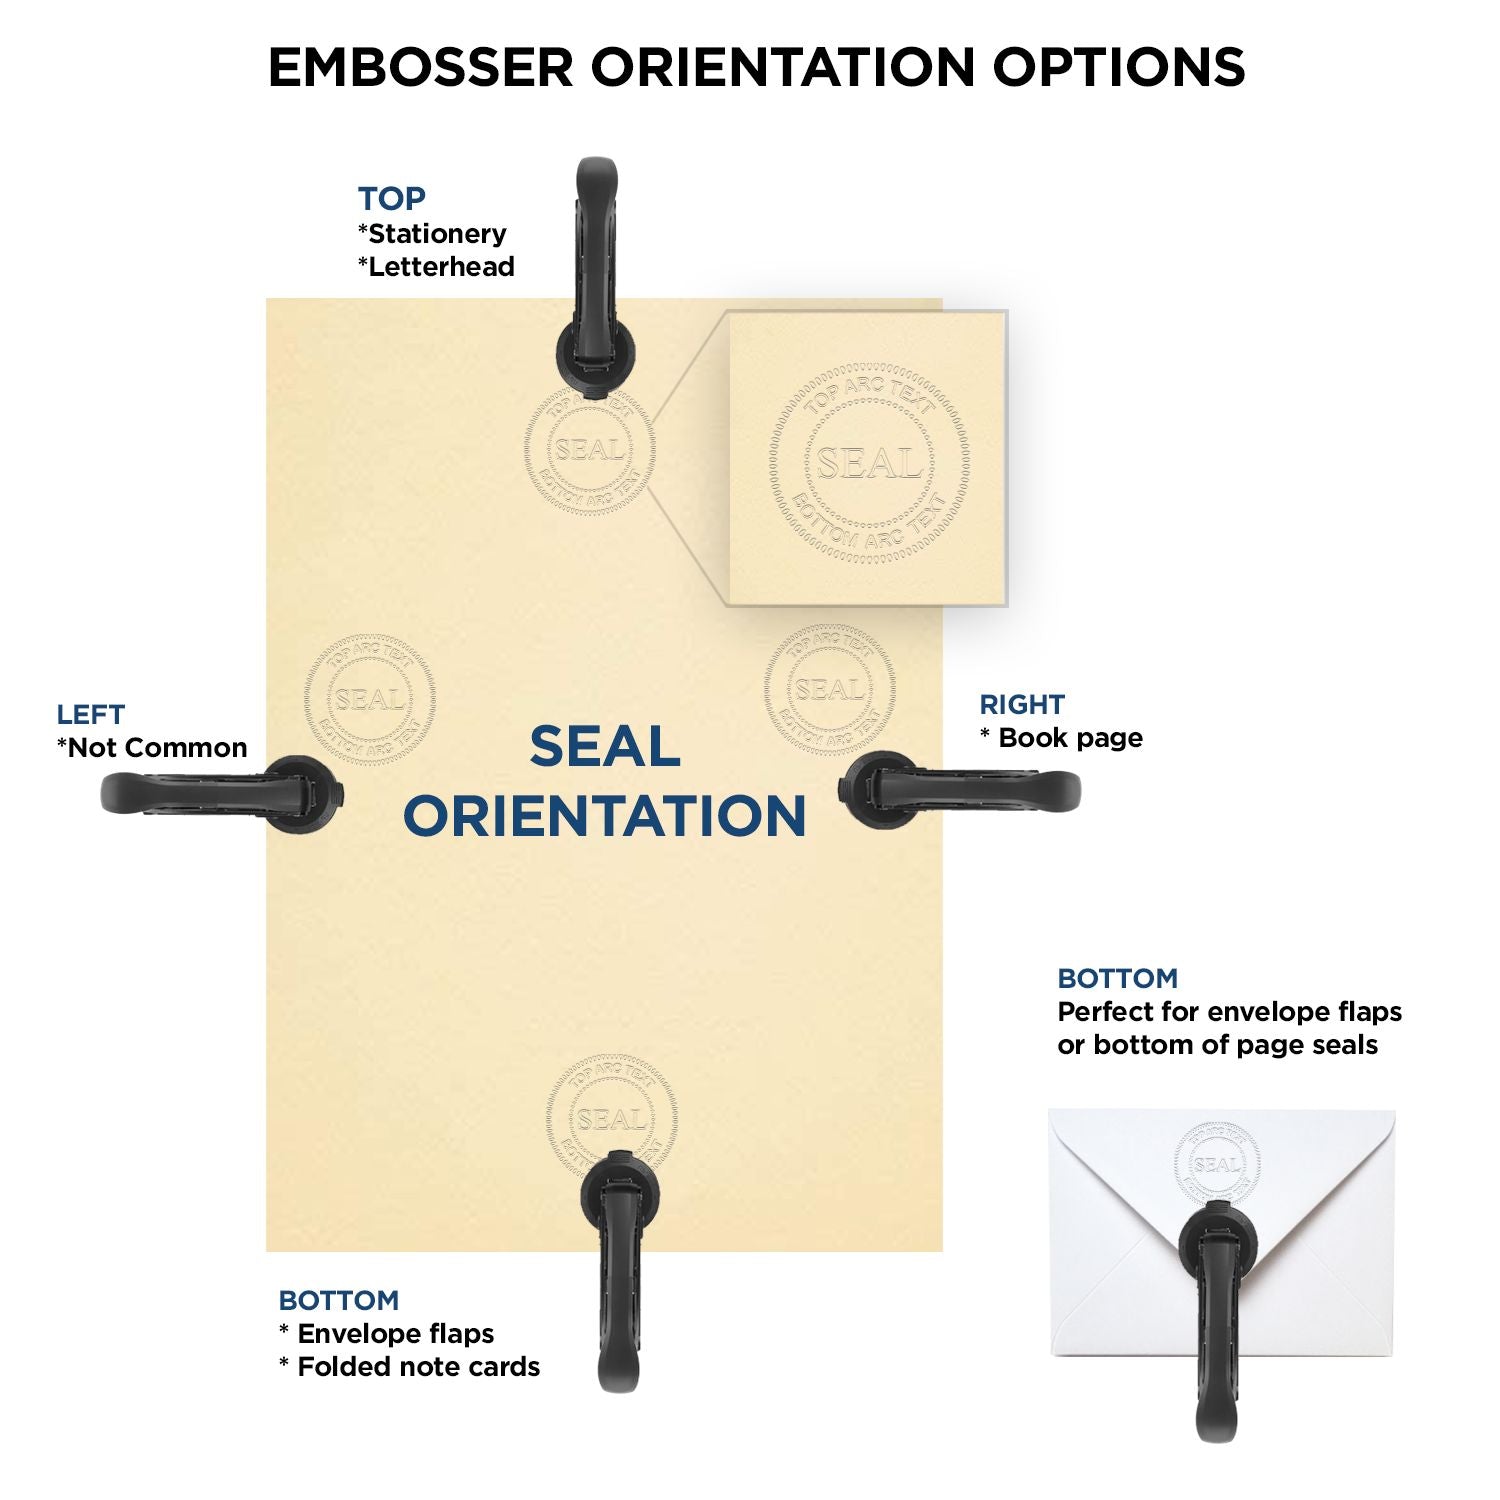 An infographic for the State of North Carolina Long Reach Architectural Embossing Seal showing embosser orientation, this is showing examples of a top, bottom, right and left insert.